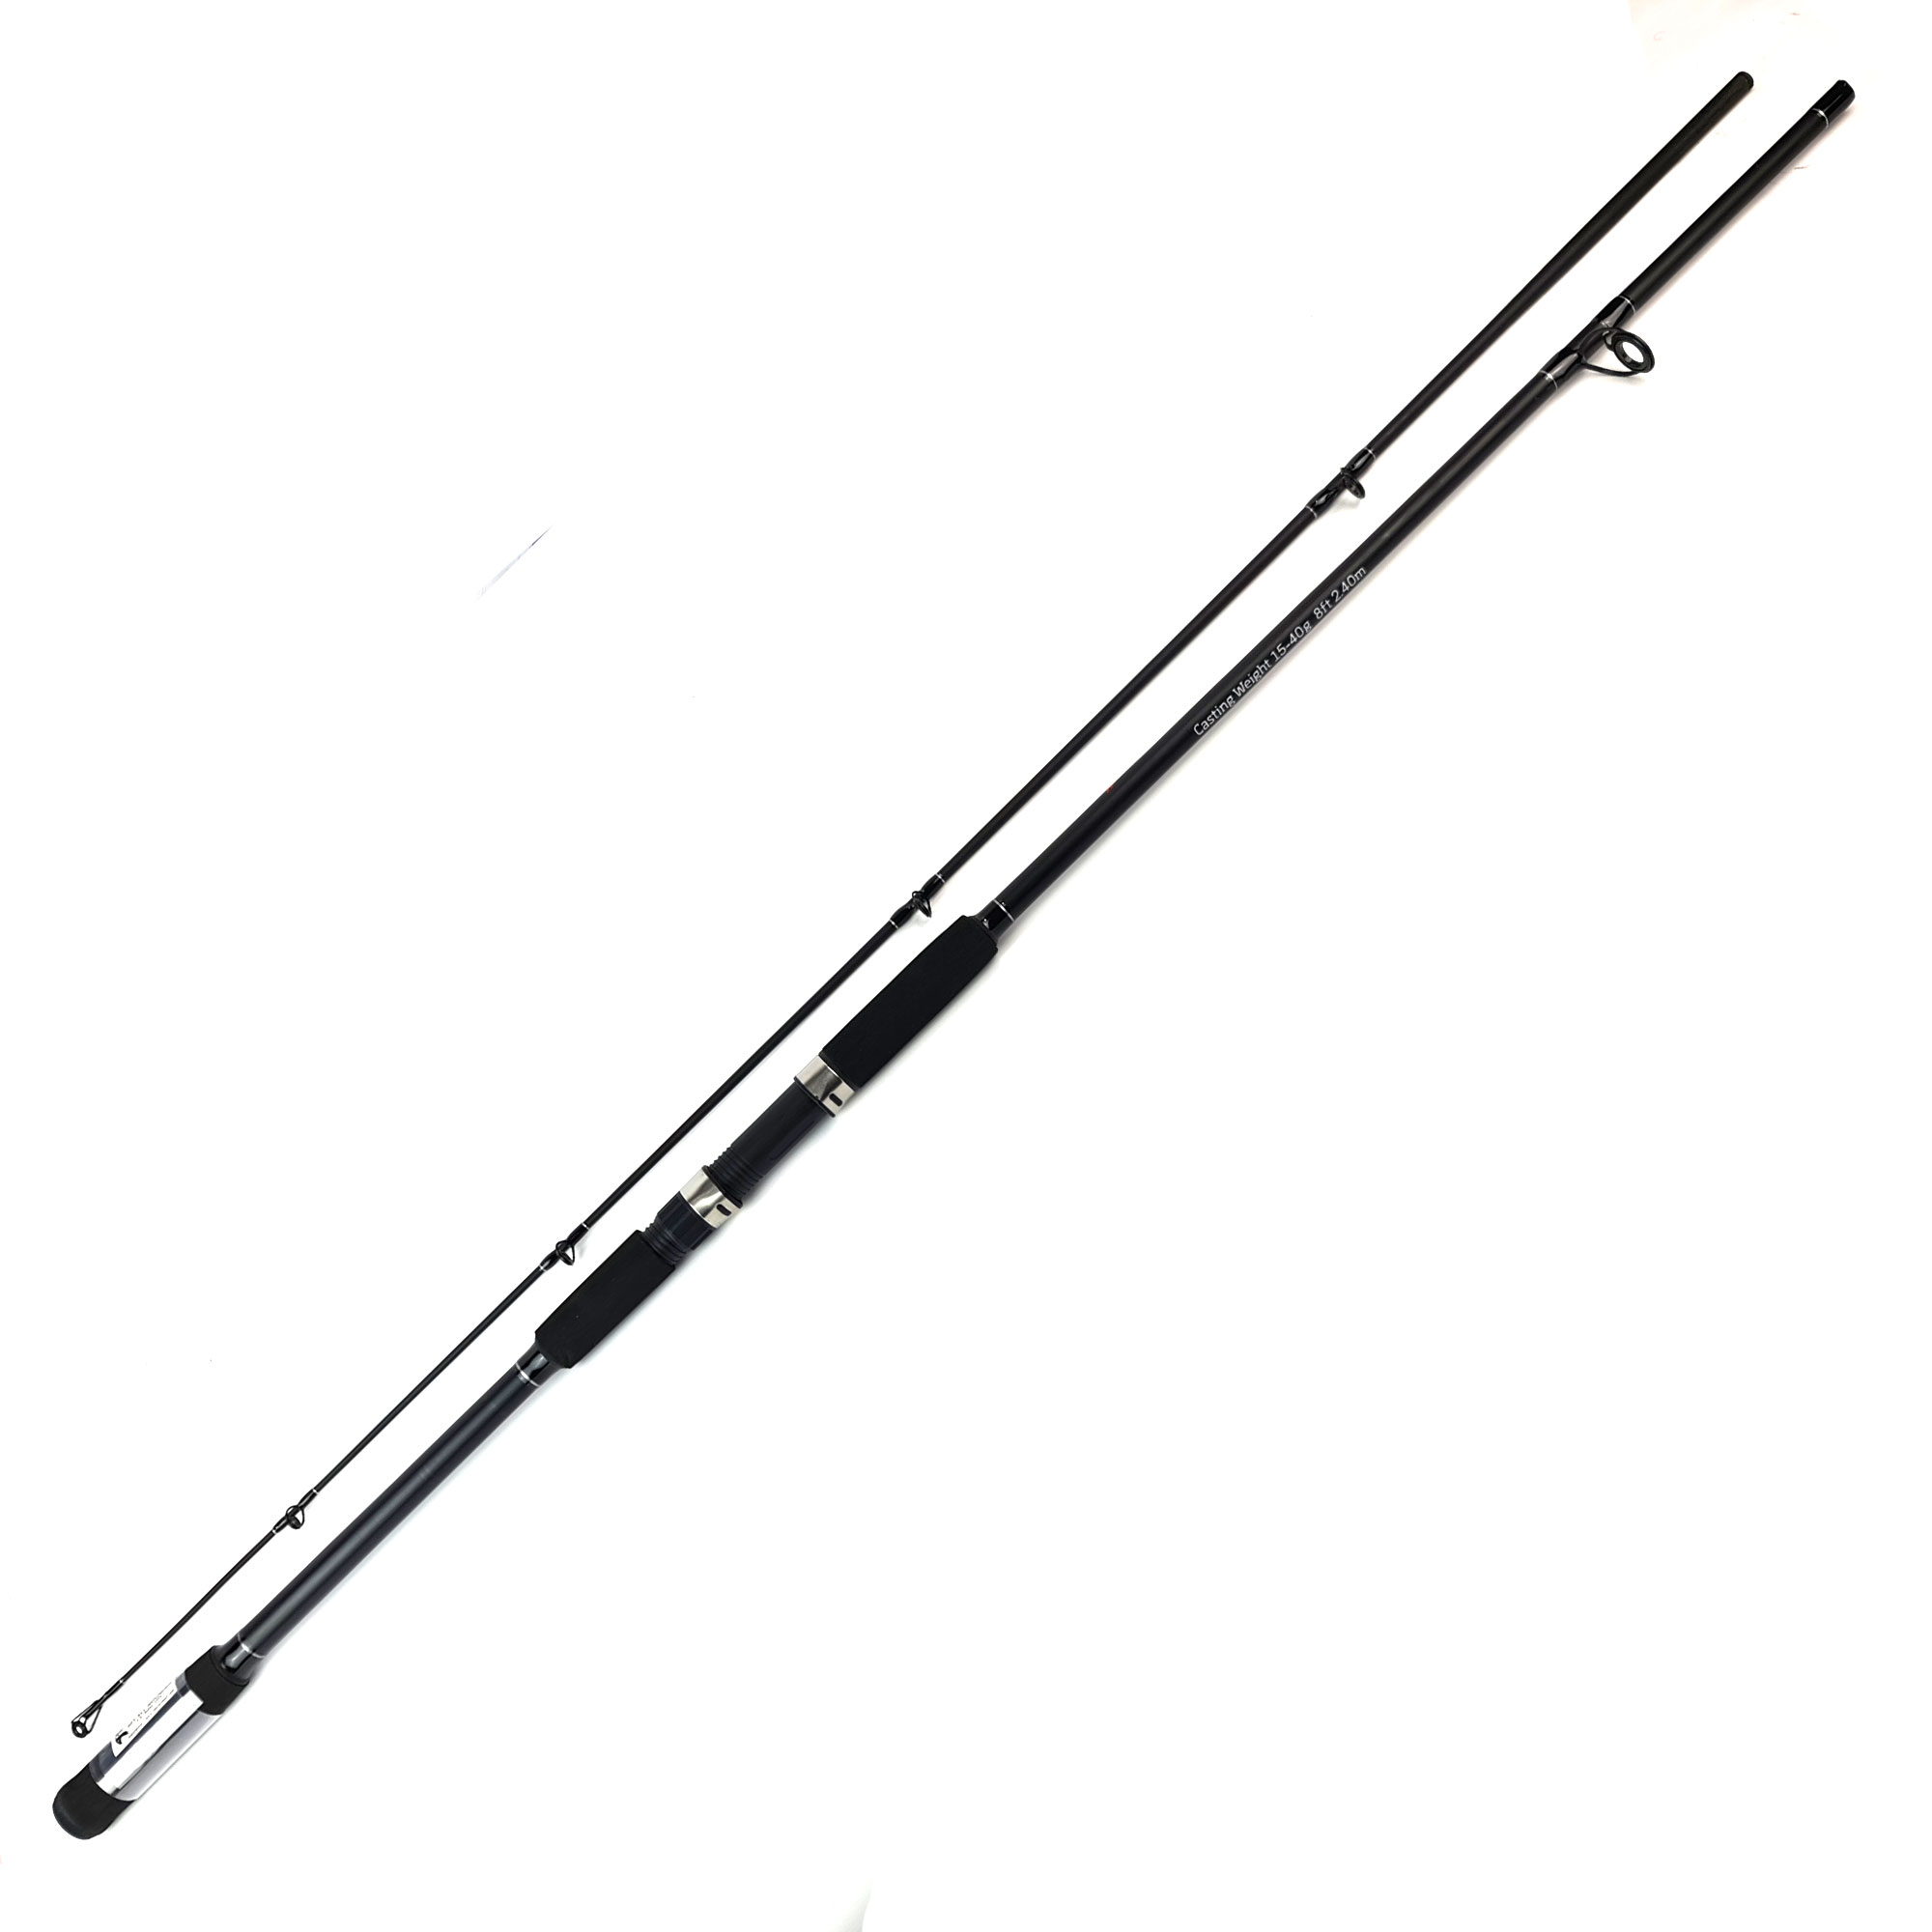 Fisheagle All-Rounder Spinning Rod 8ft 15-40g 2pc: 8ft